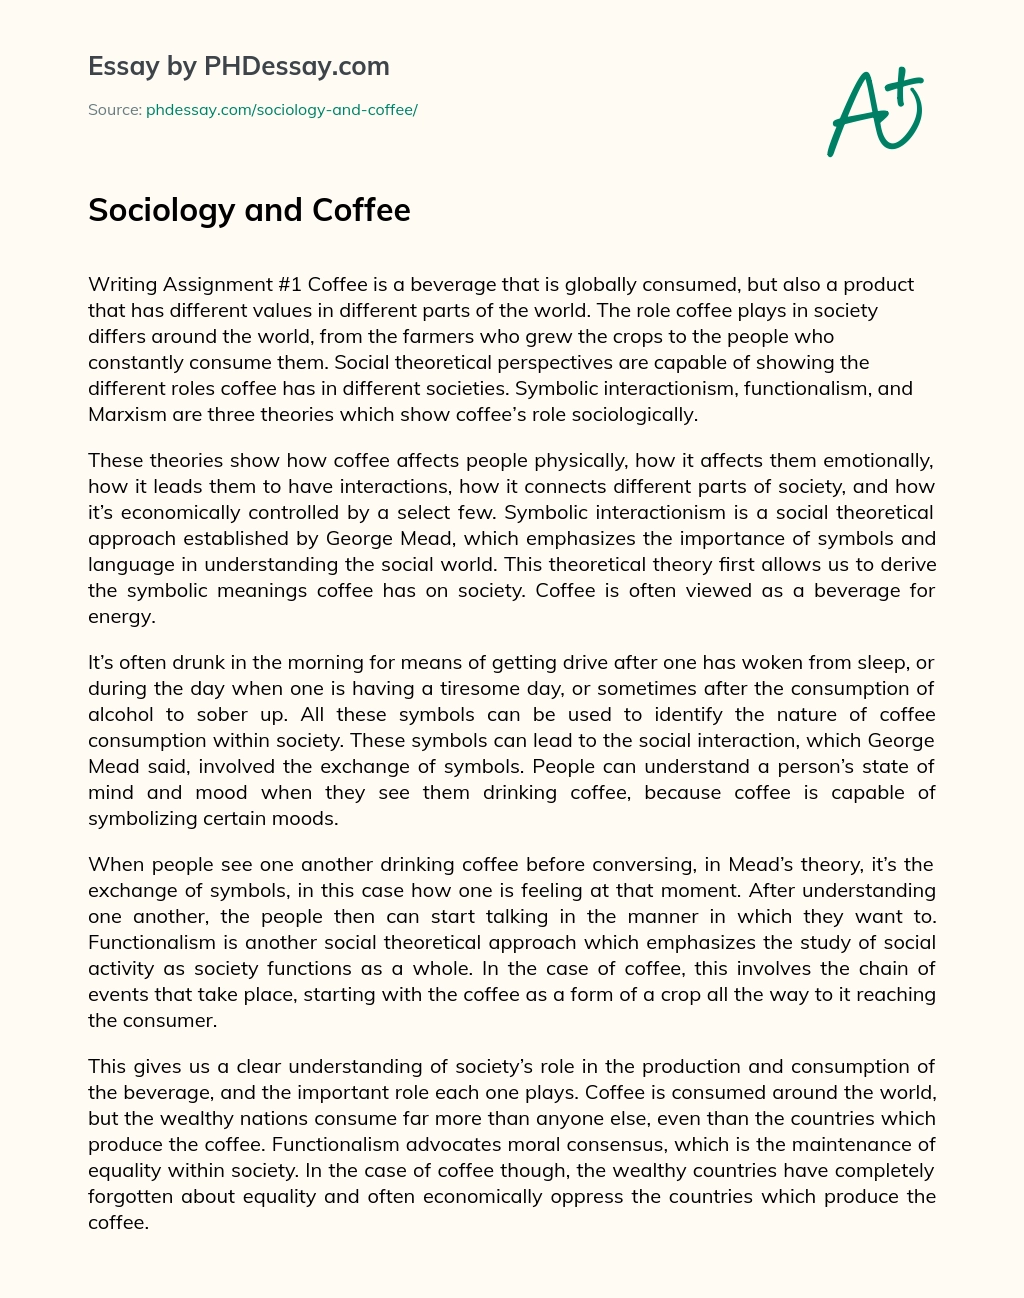 Sociology and Coffee essay